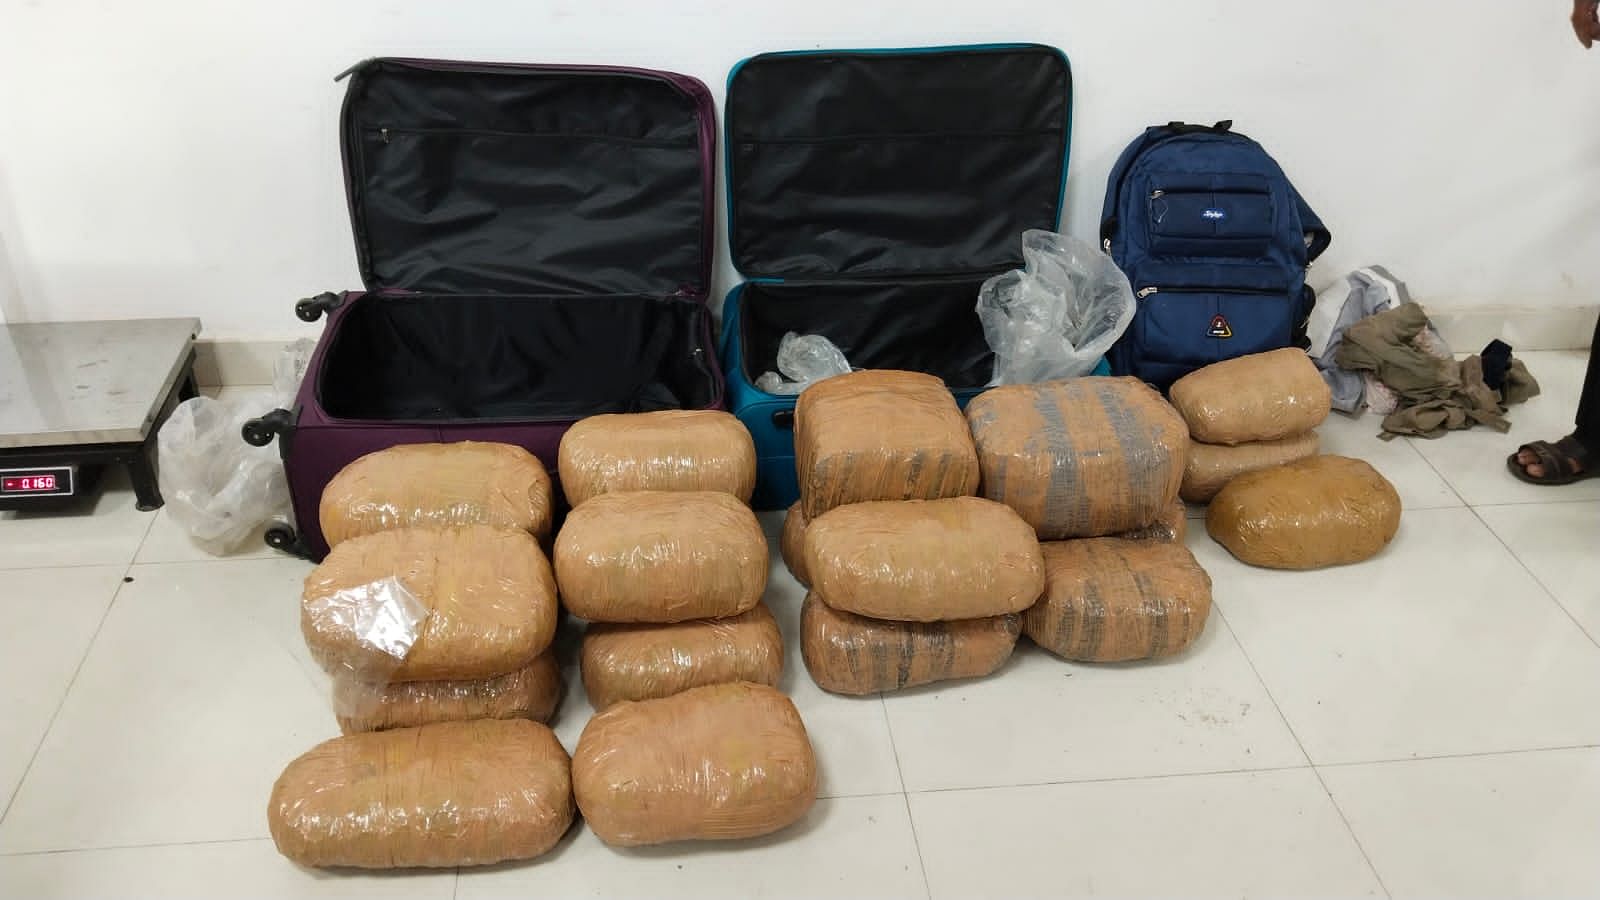 The ganja seized by the Railway Protection Force. Credit: Special Arrangement